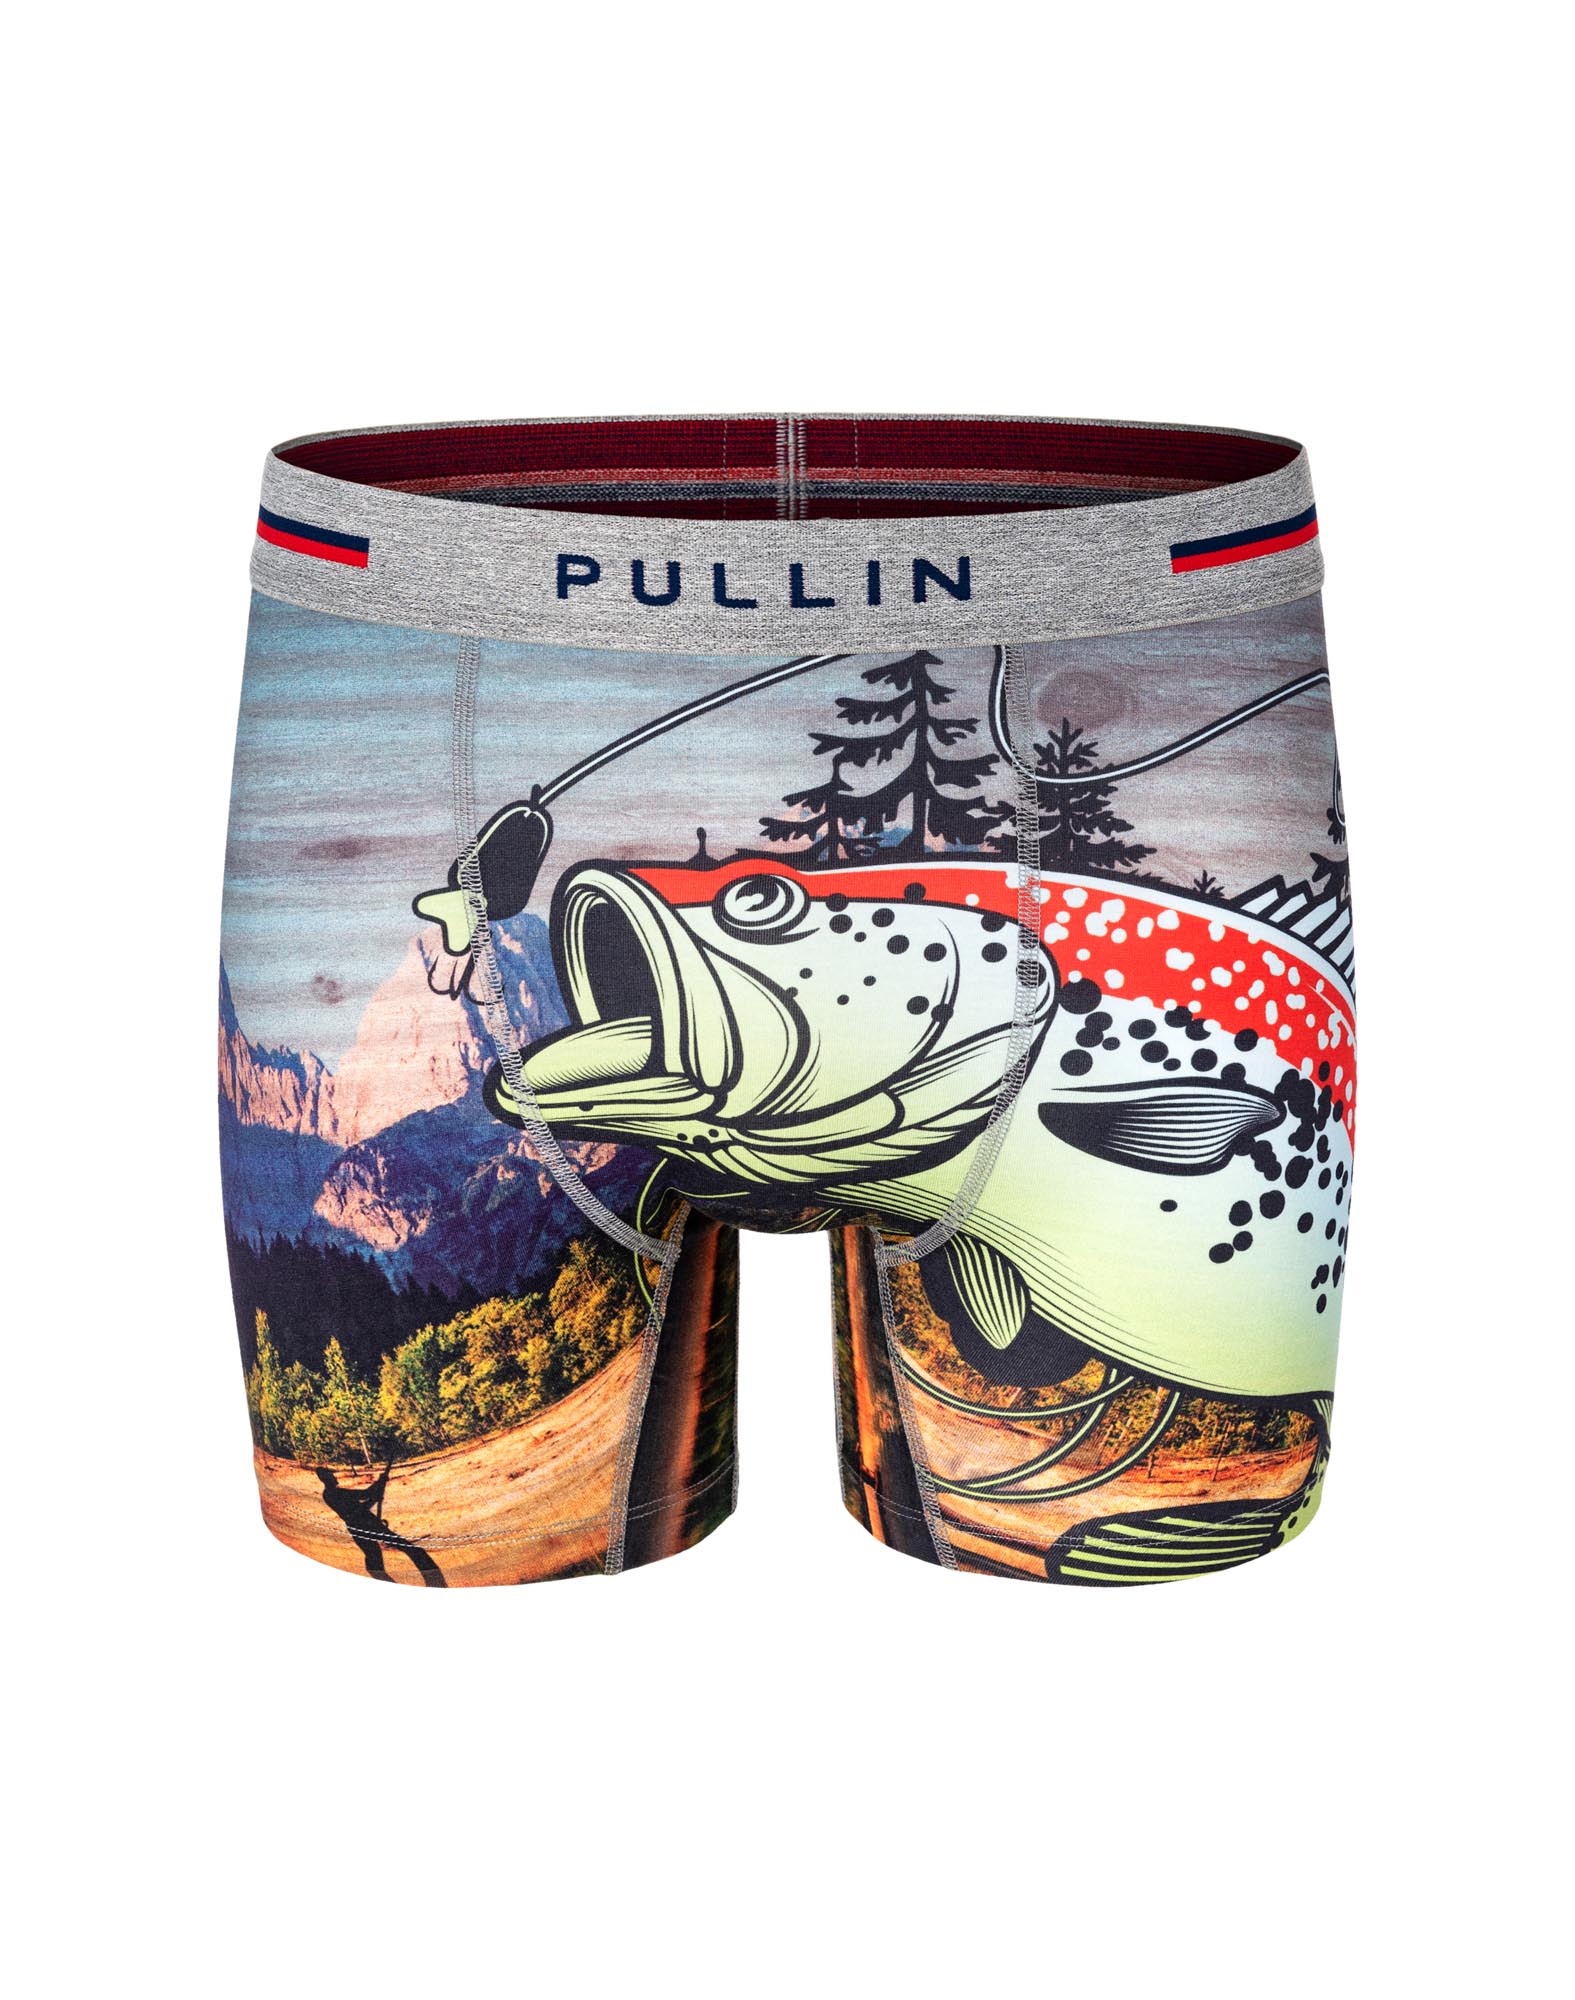 PULLIN - Boxer Fashion 2 GONEFISHING – LE CAPITAINE D'A BORD